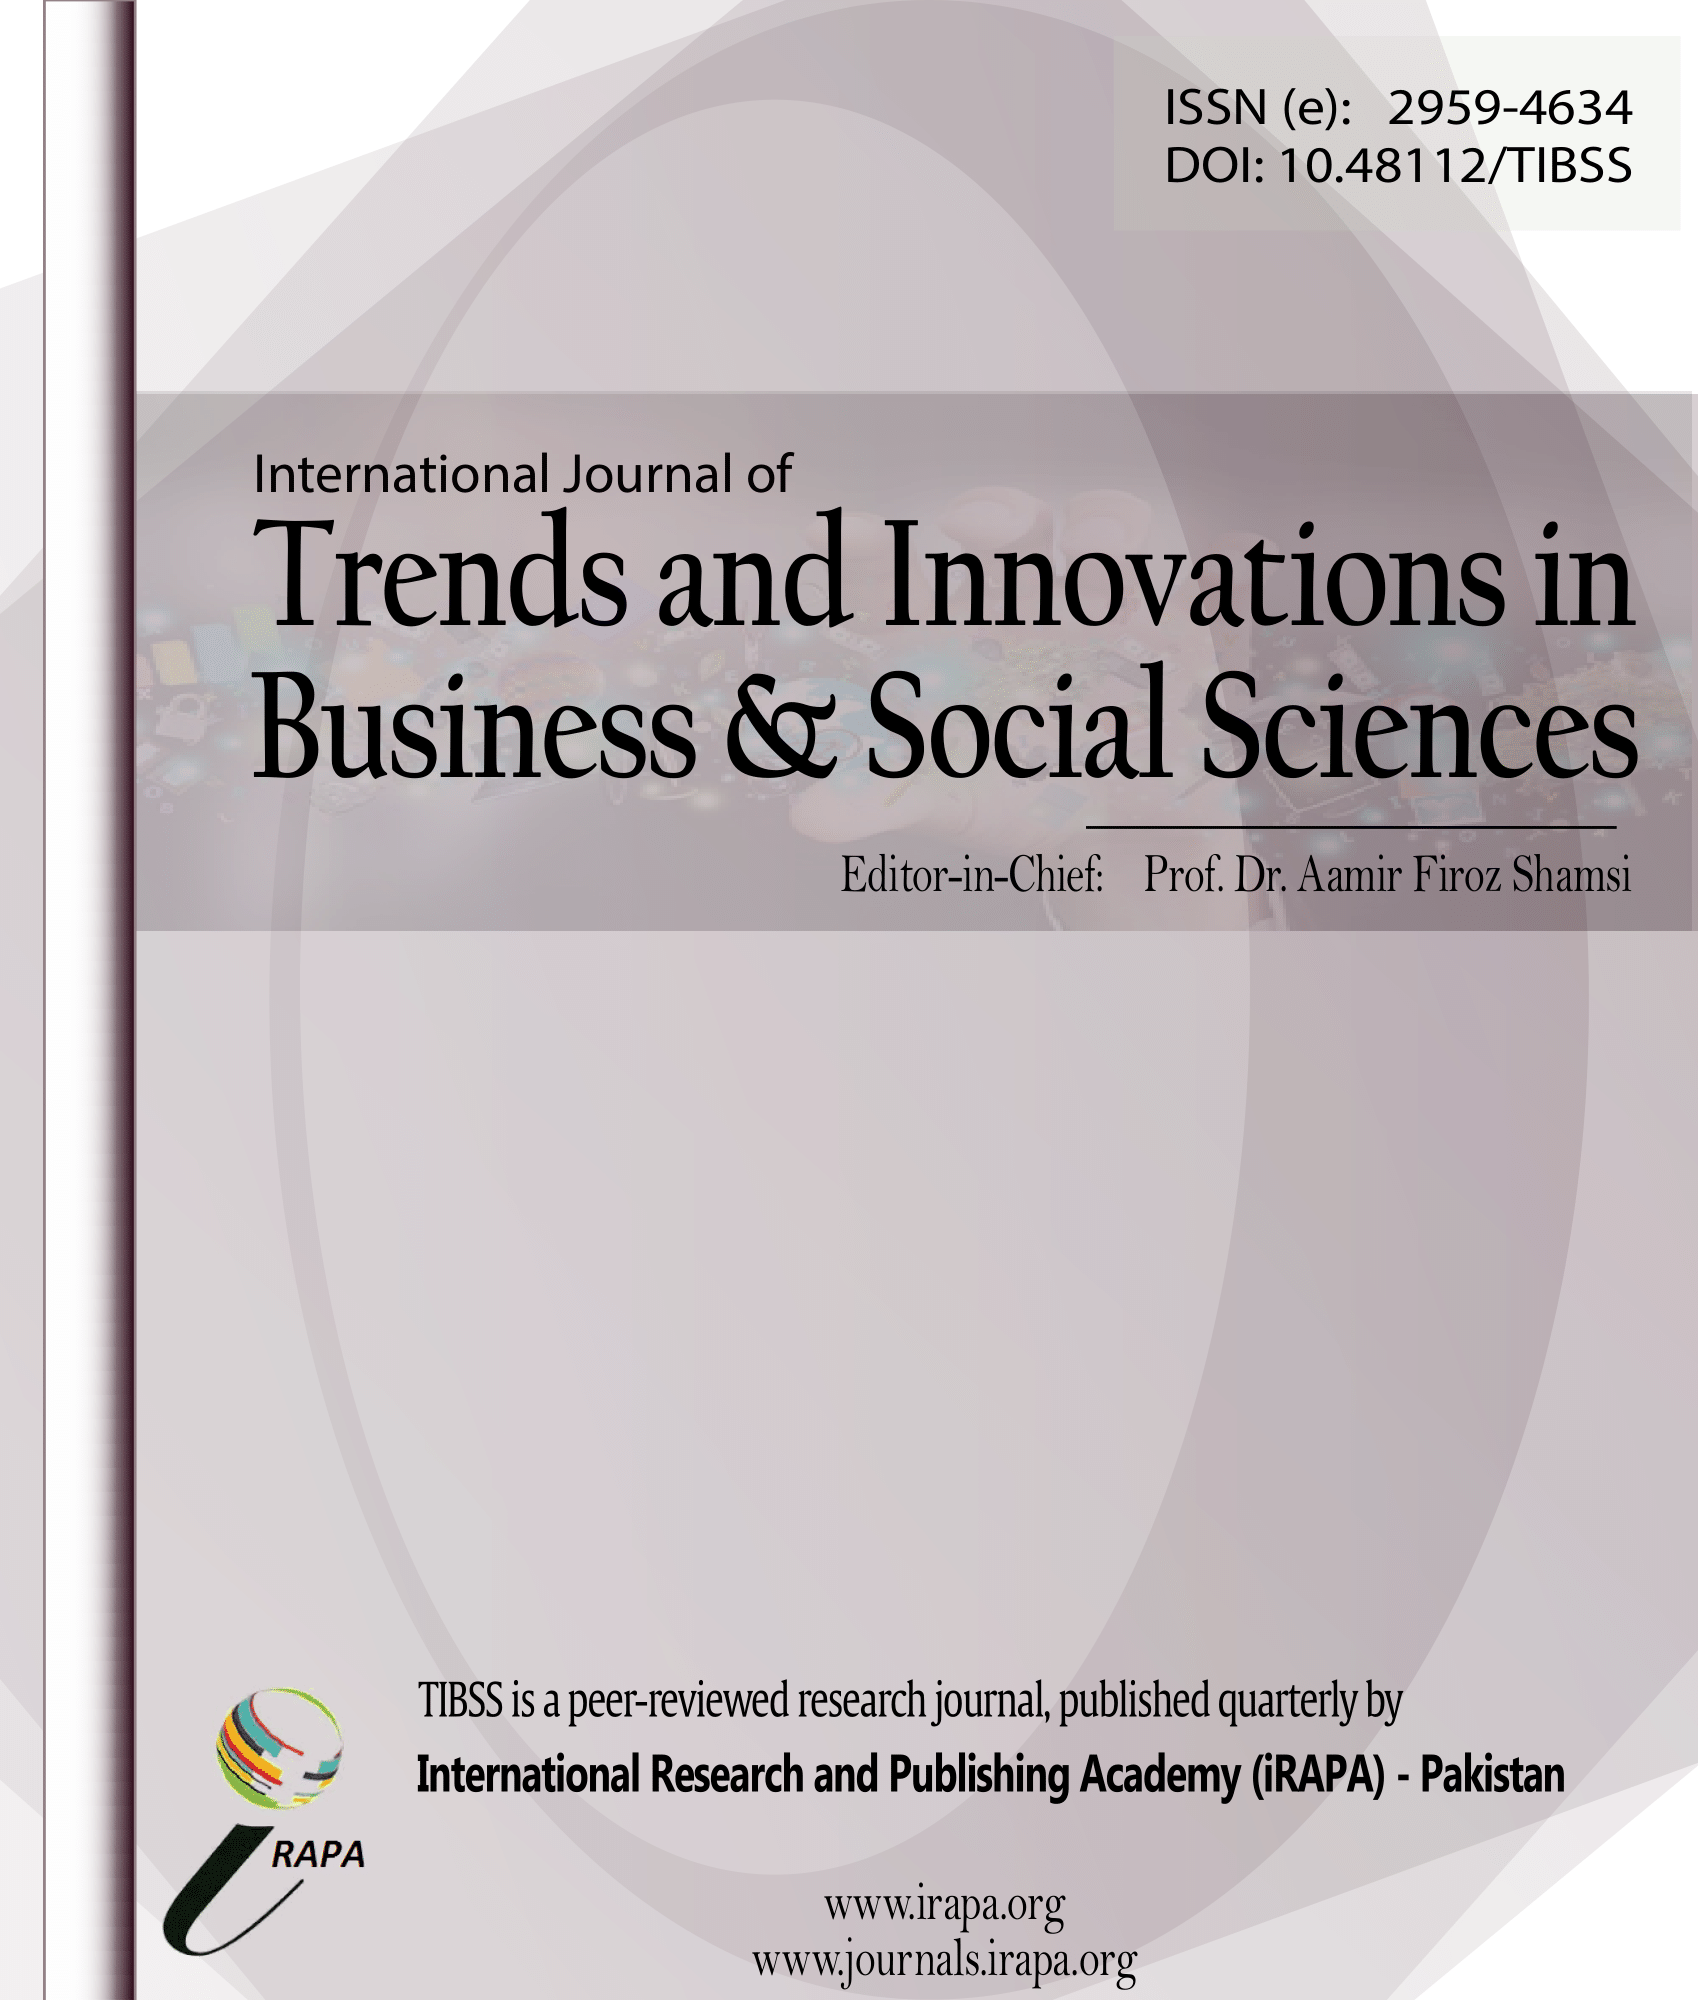 International Journal of Trends and Innovations in Business & Social Sciences